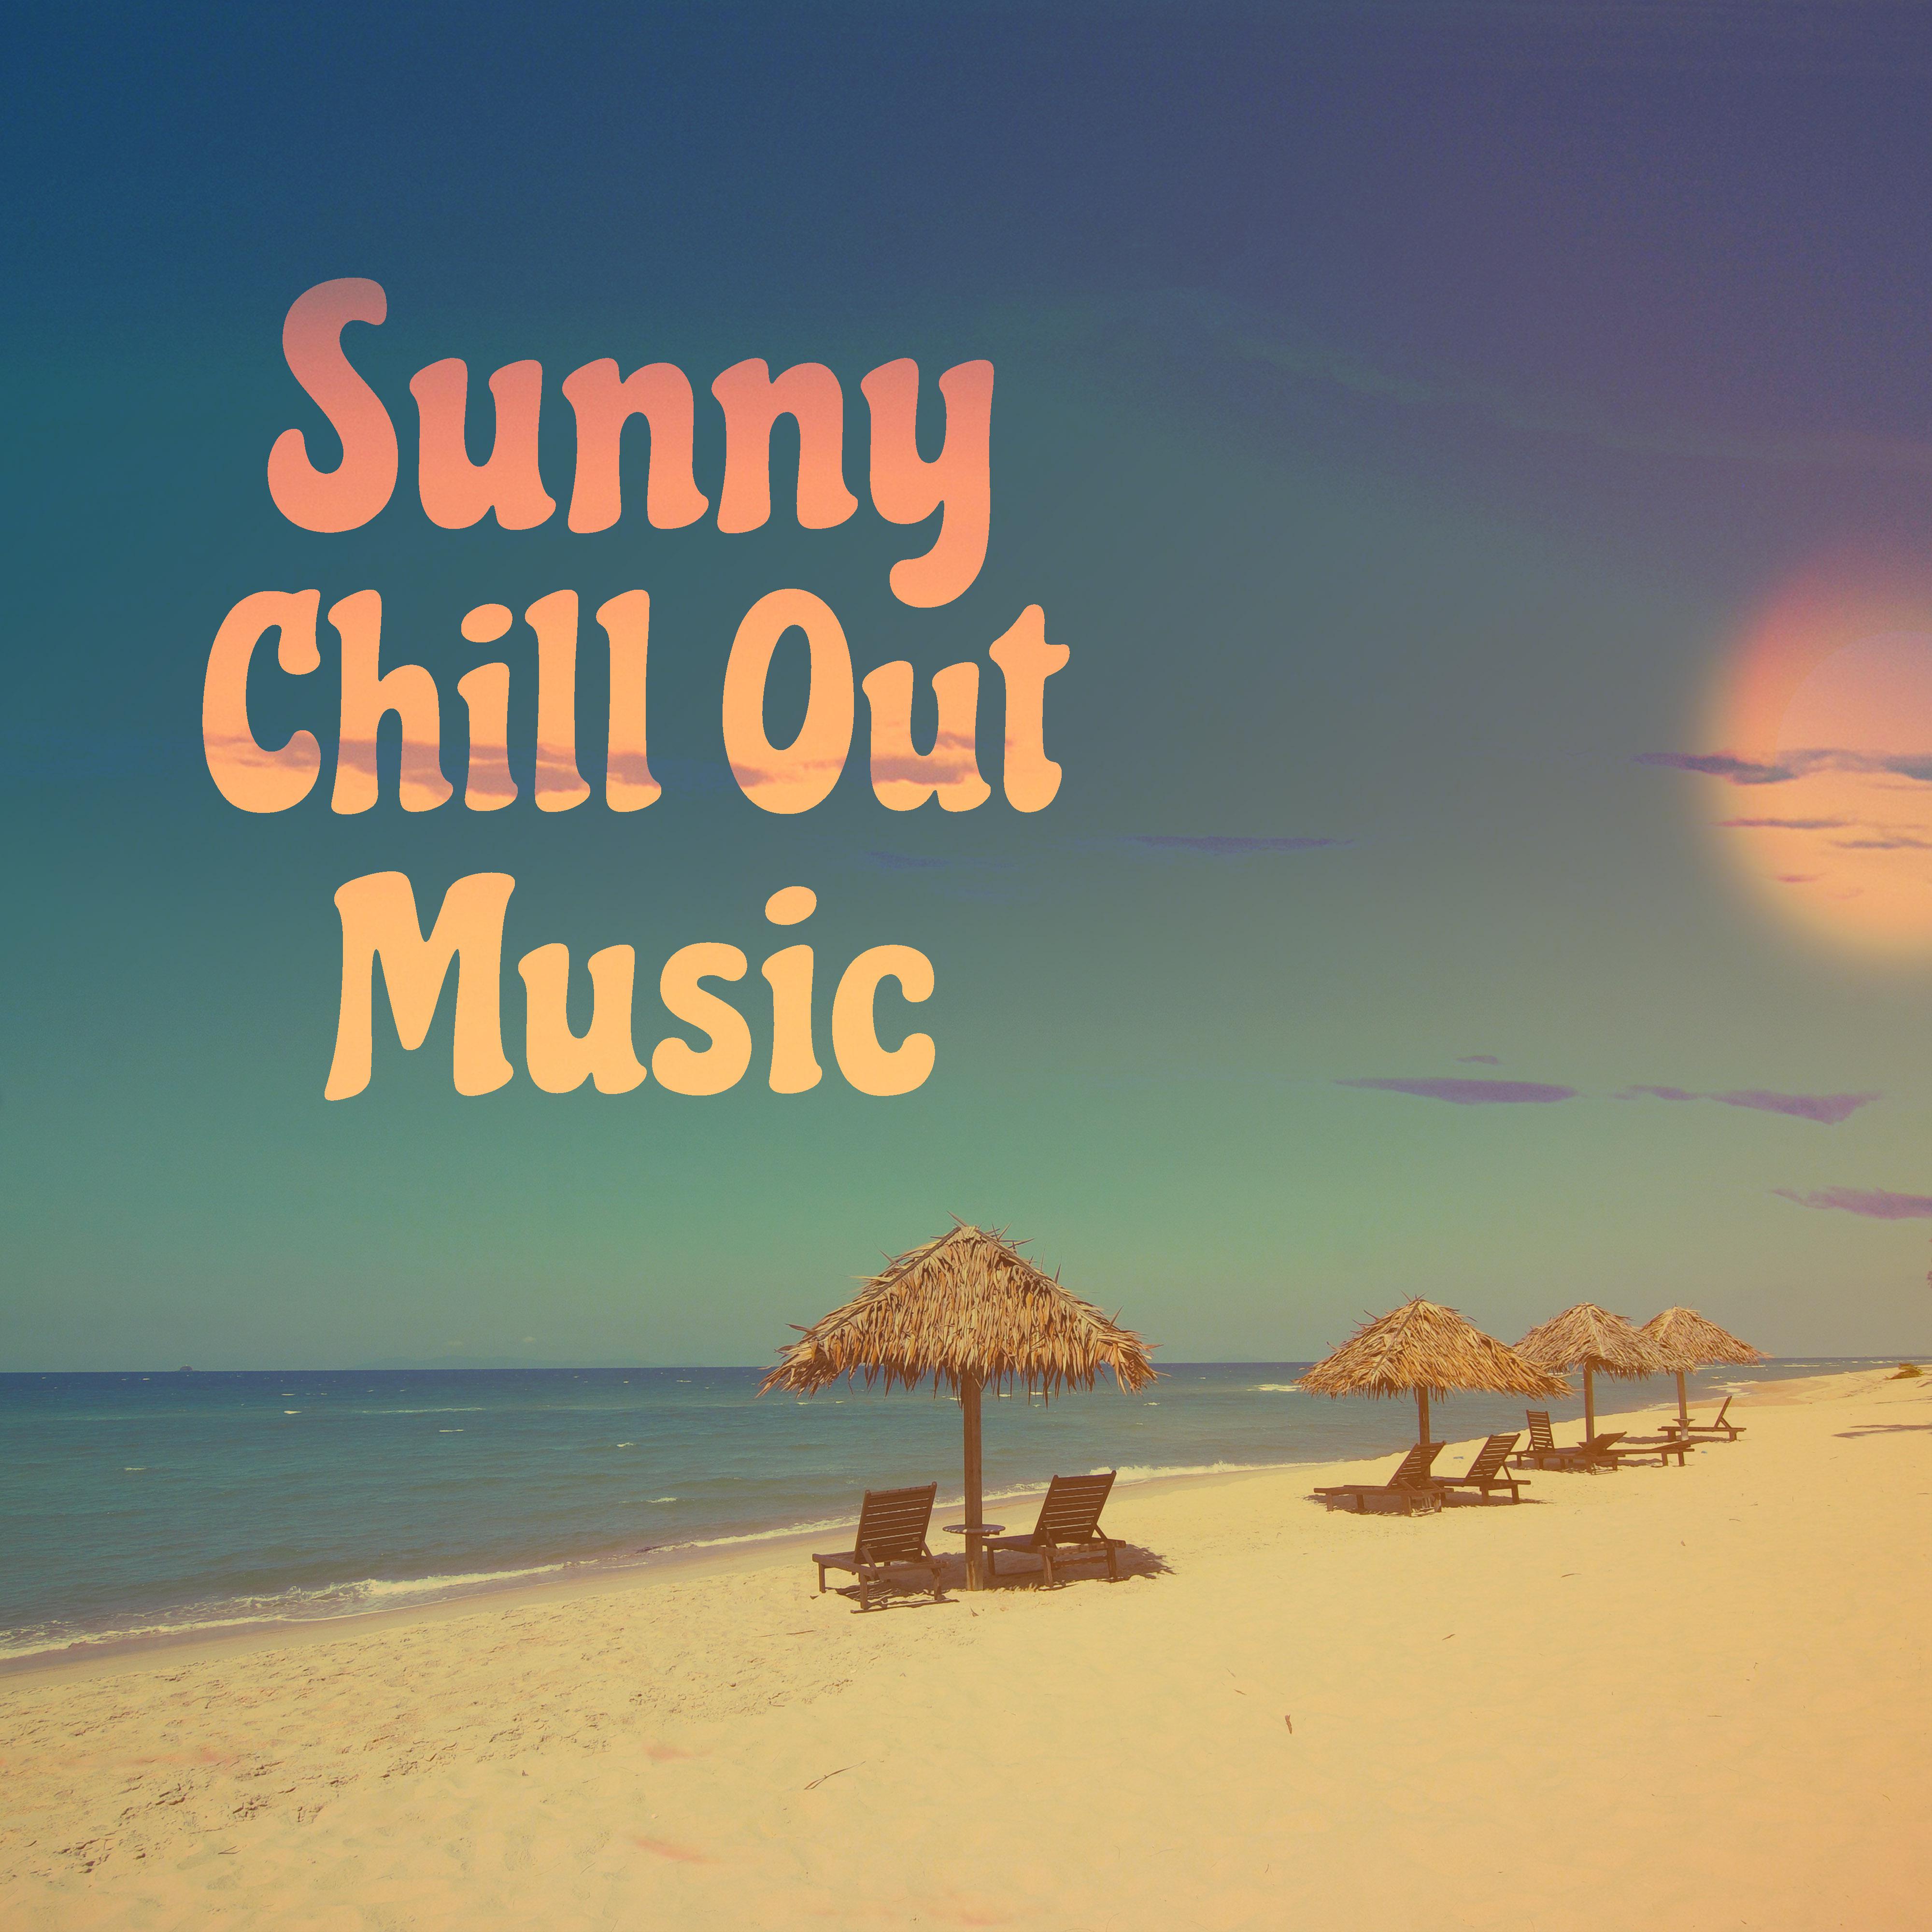 Sunny Chill Out Music – Summer Time Music, Stress Relief, Peaceful Music, Exotic Island